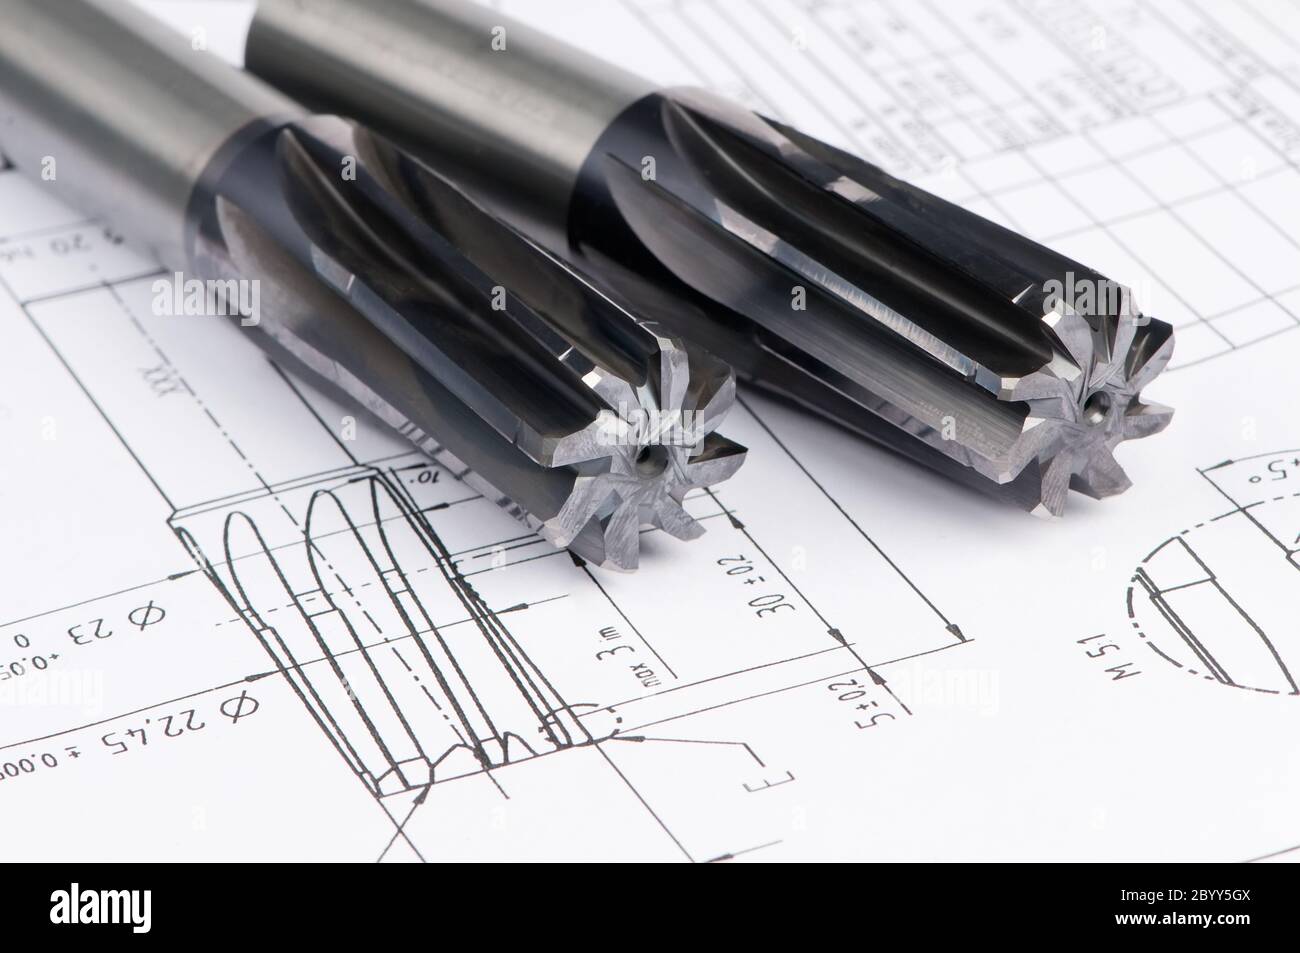 finished metal reamer tools Stock Photo